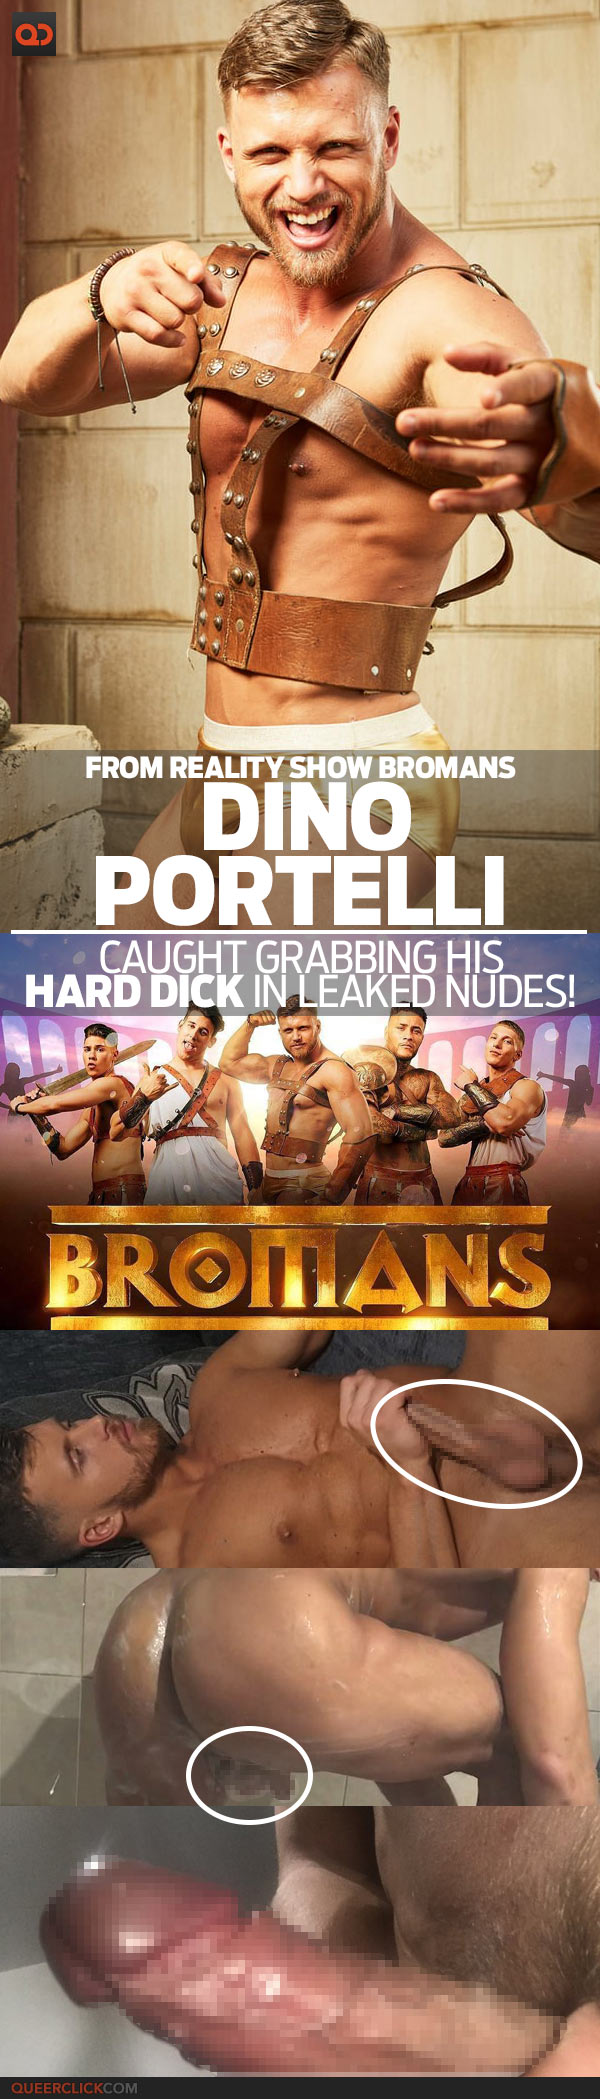 Dino Portelli, From British Reality Show Bromans, Caught Grabbing His Dick In Leaked Nudes!